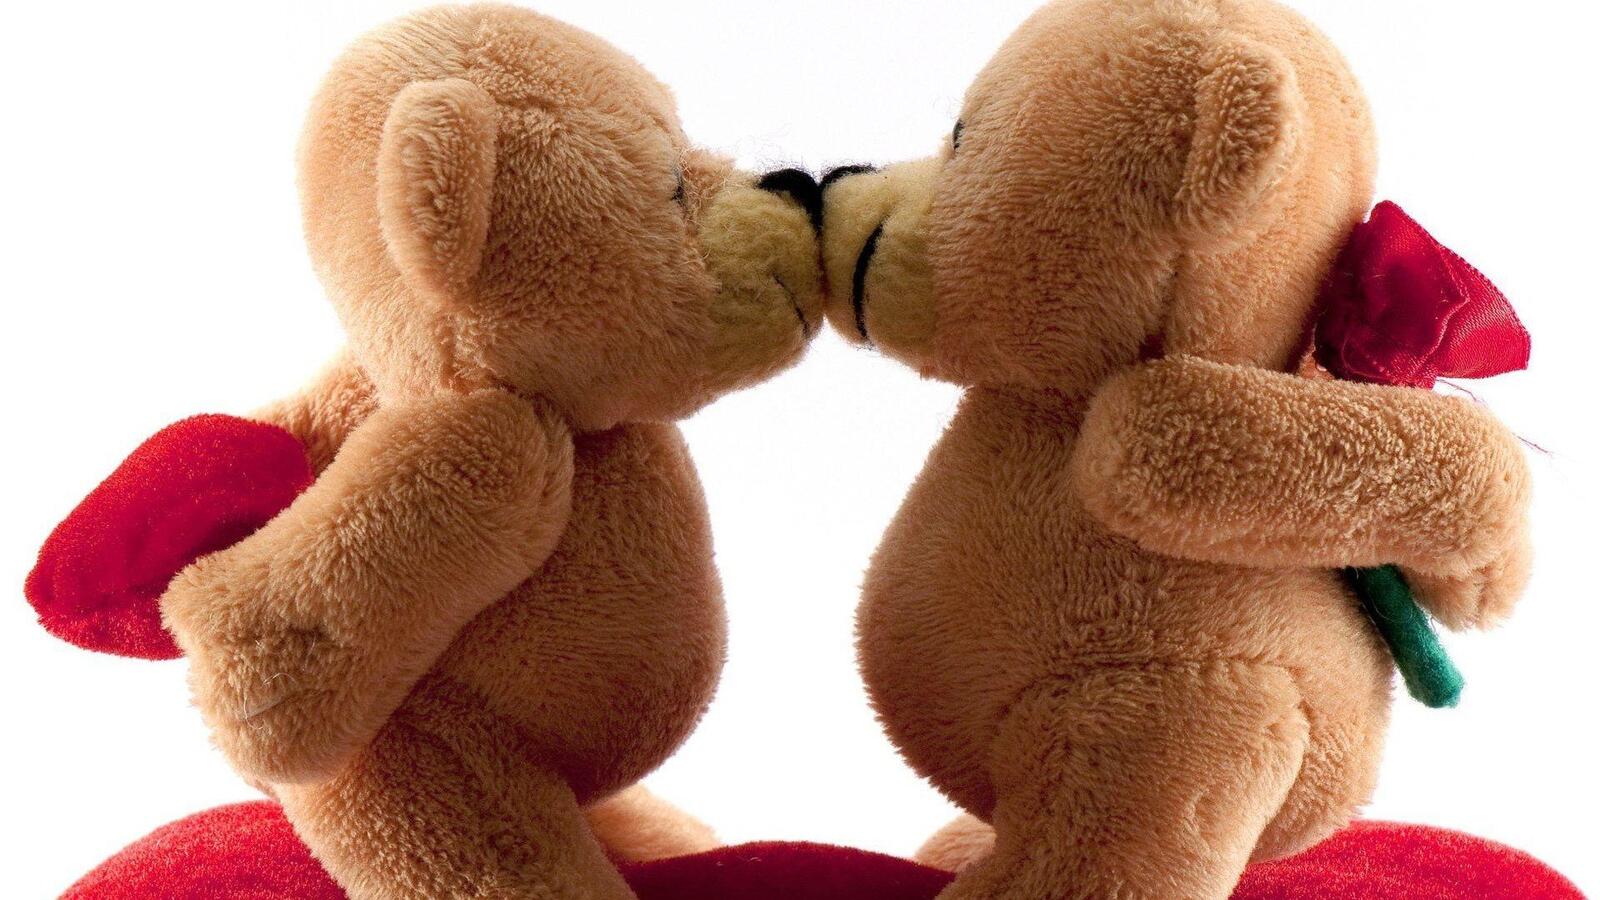 Free photo Two teddy bears kissing each other